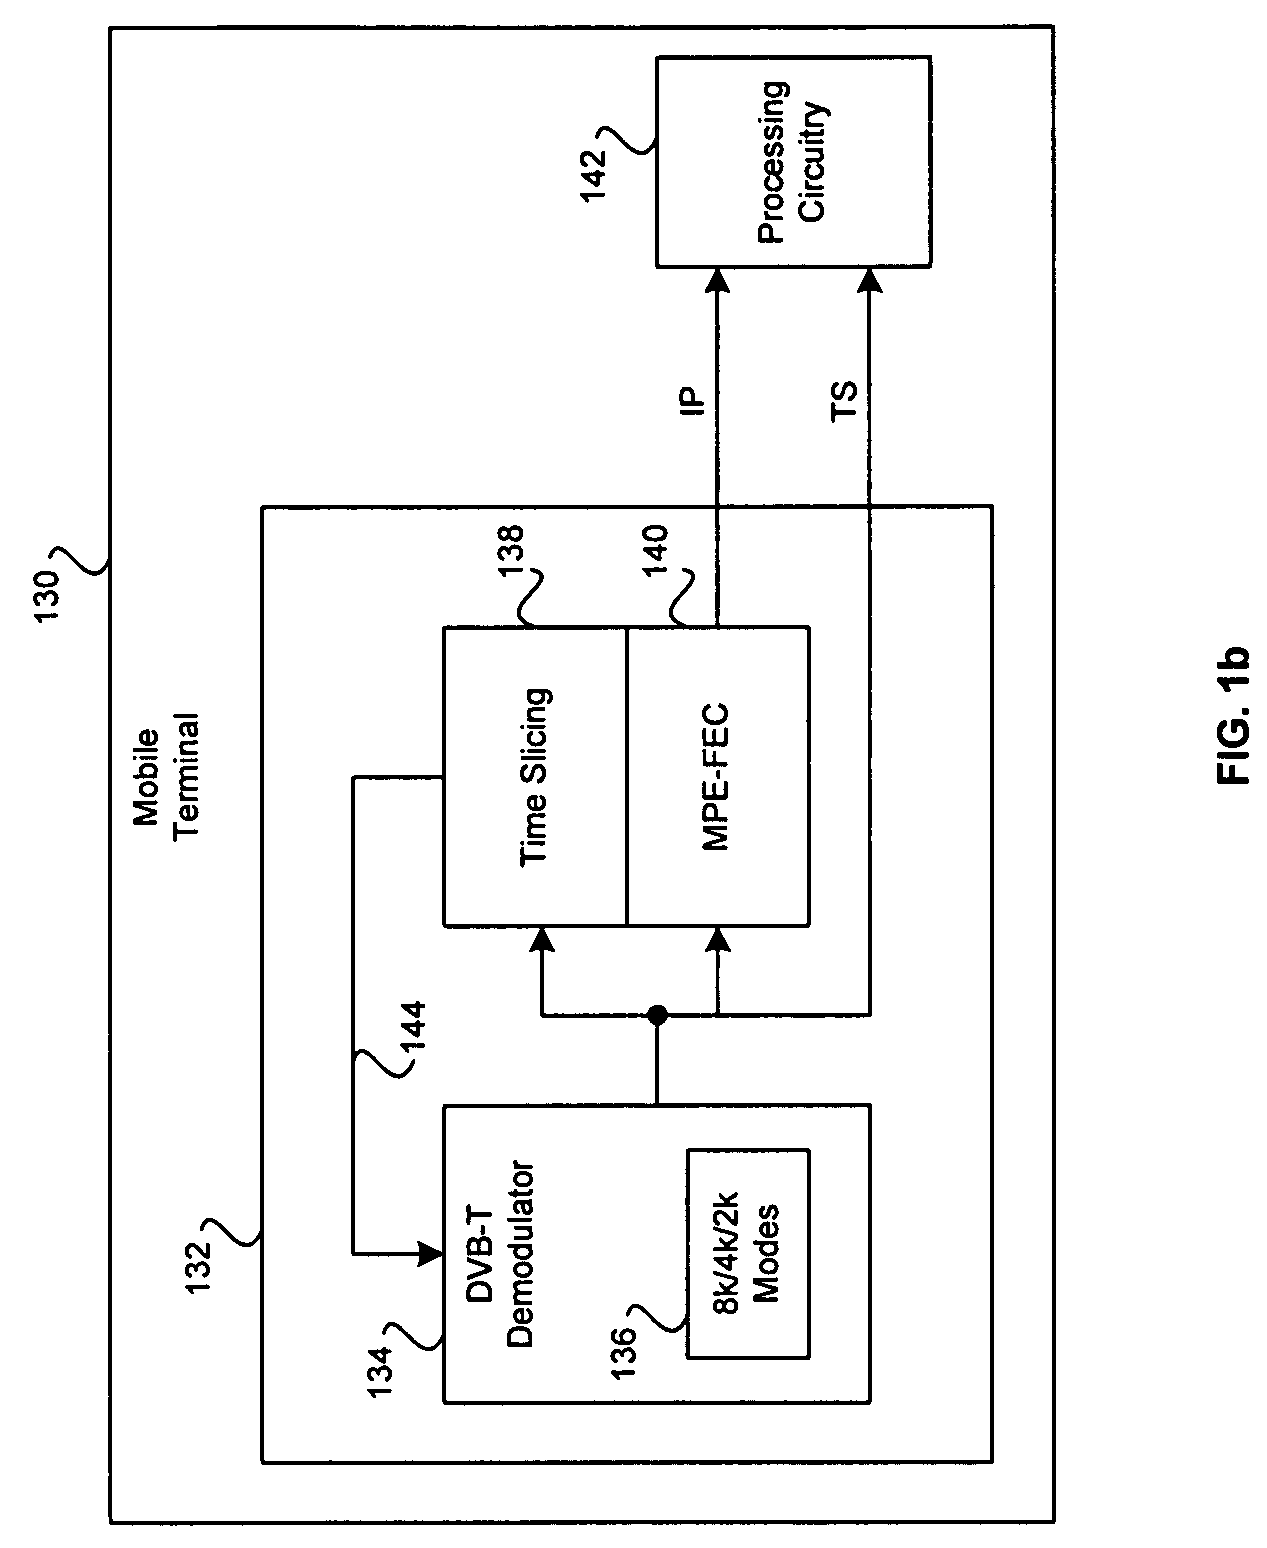 Method and system for a mobile receiver architecture for world band cellular and broadcasting